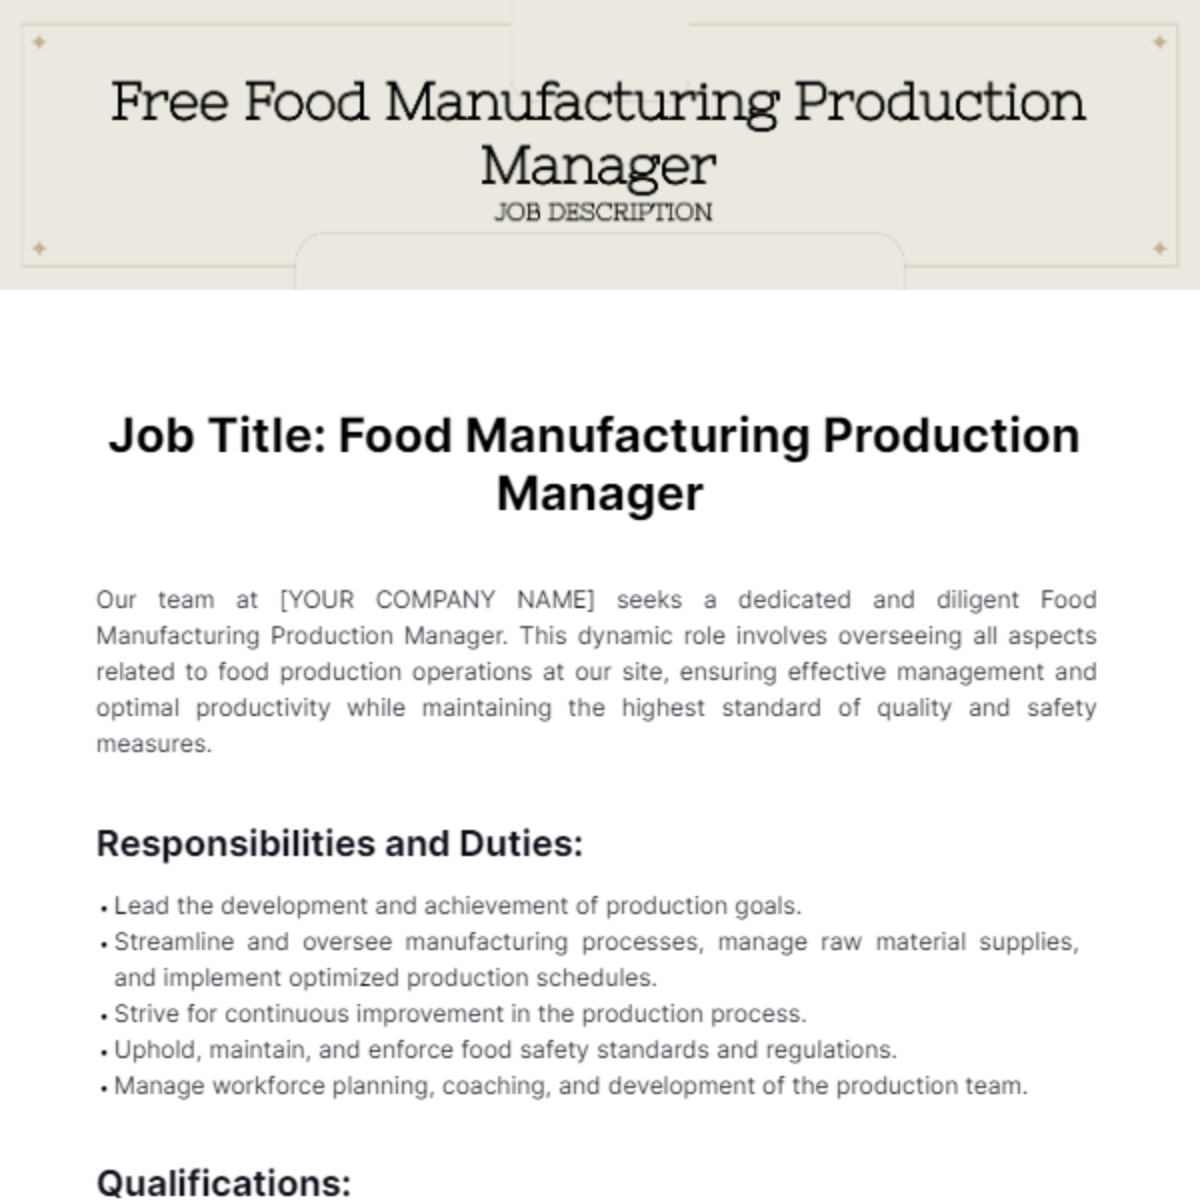 Food Manufacturing Production Manager Job Description Template